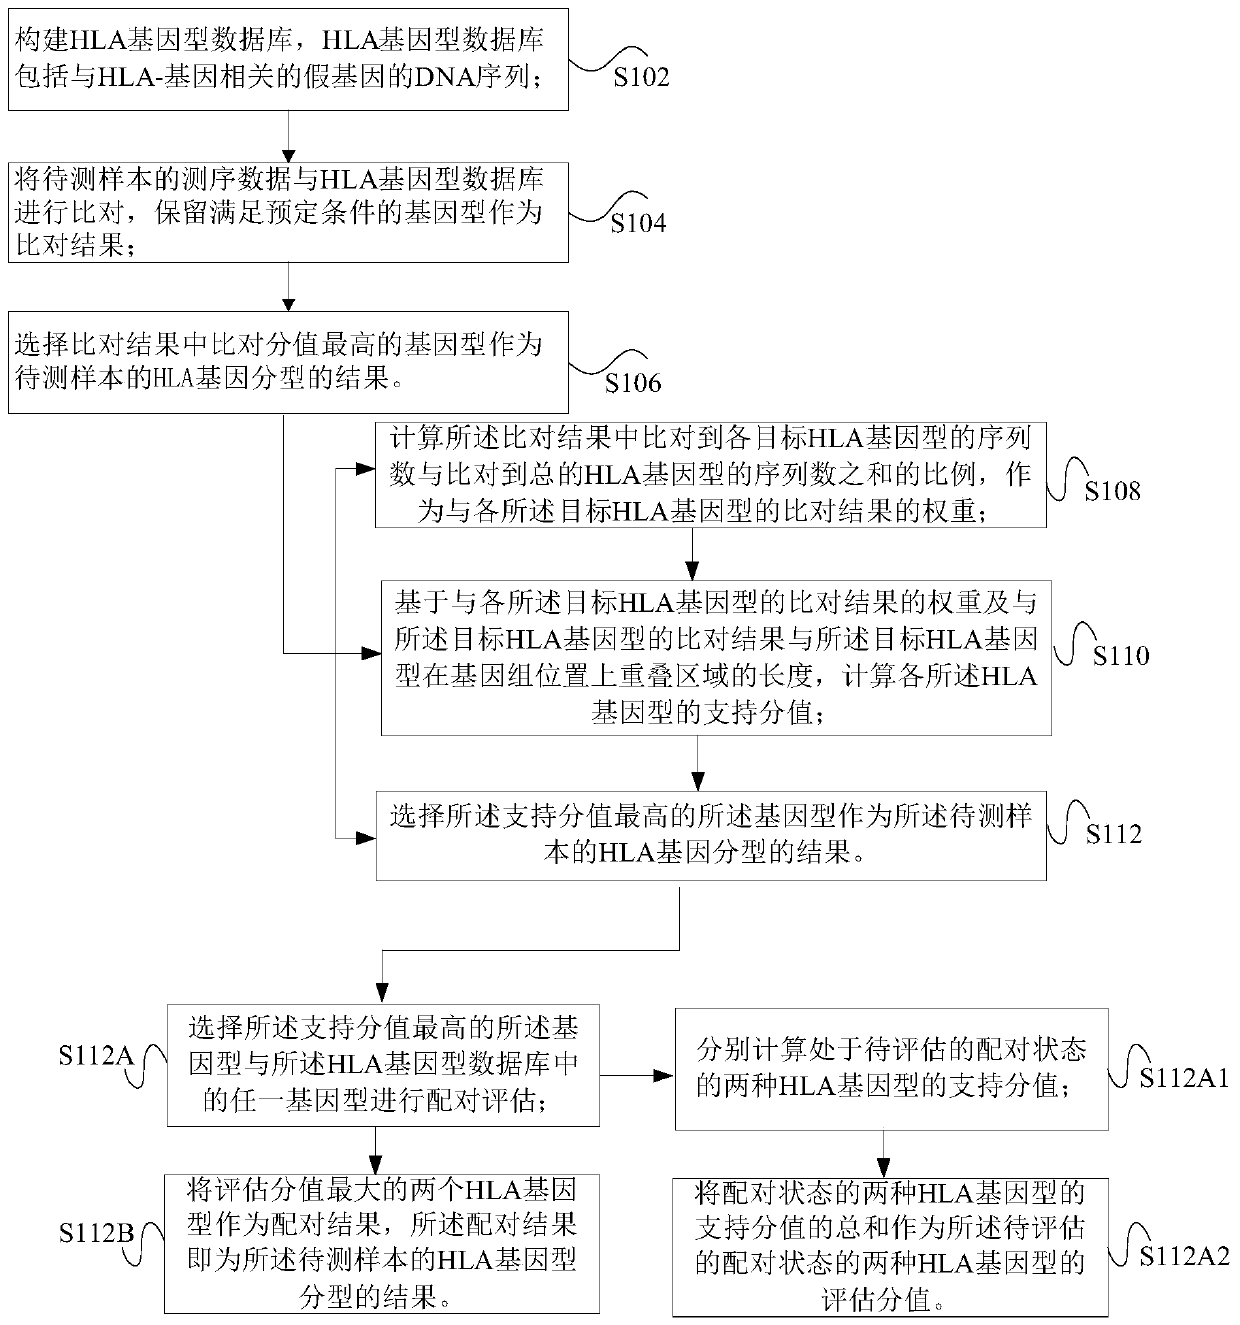 Method and device for HLA genotyping, storage medium and processor